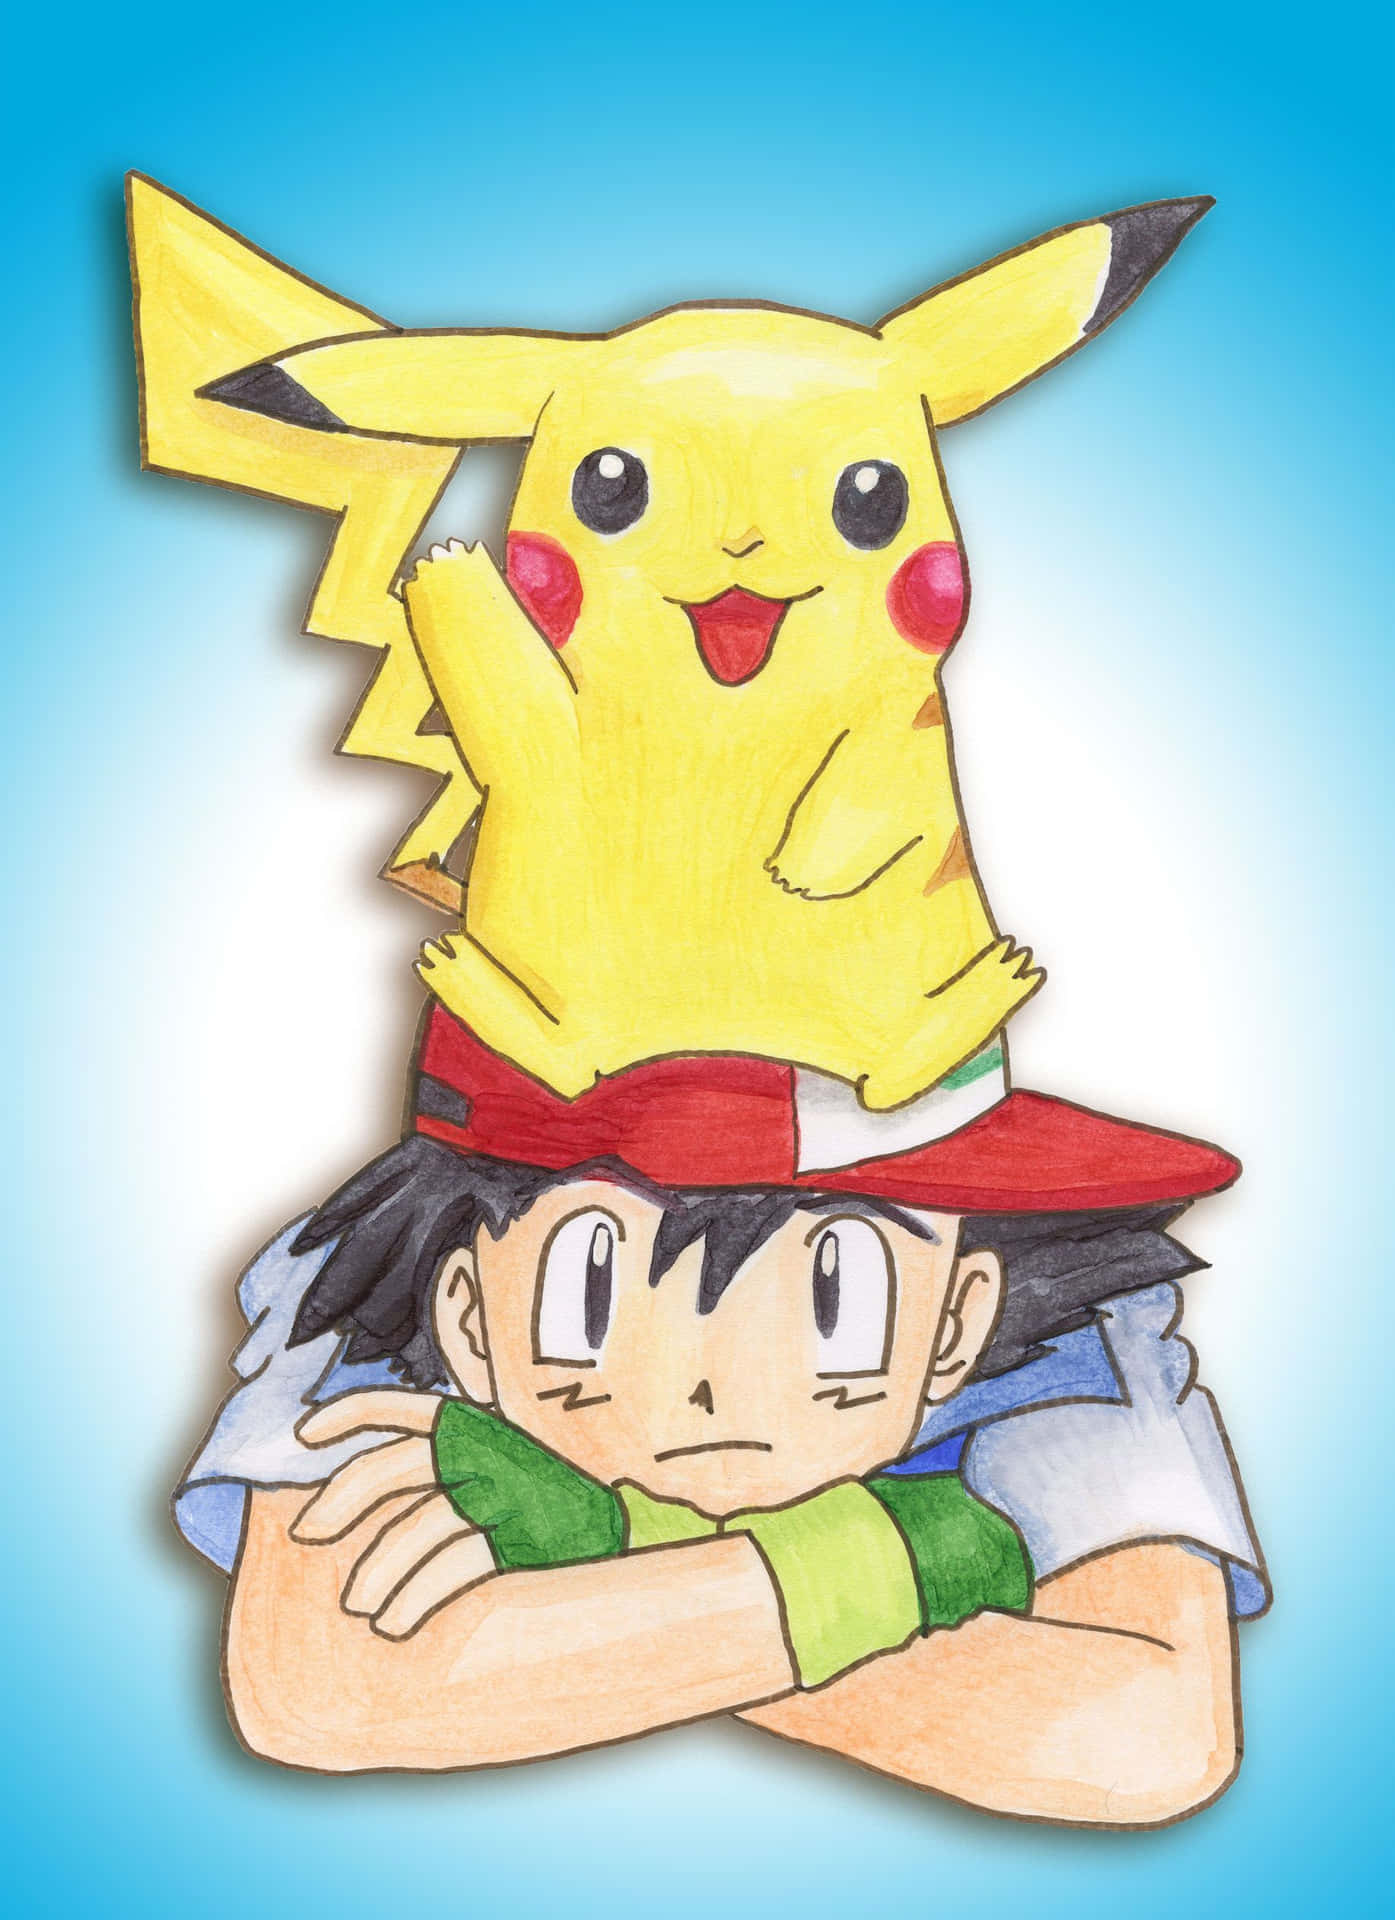 Ash and Pikachu reunited in an adventure of friendship and exploration Wallpaper